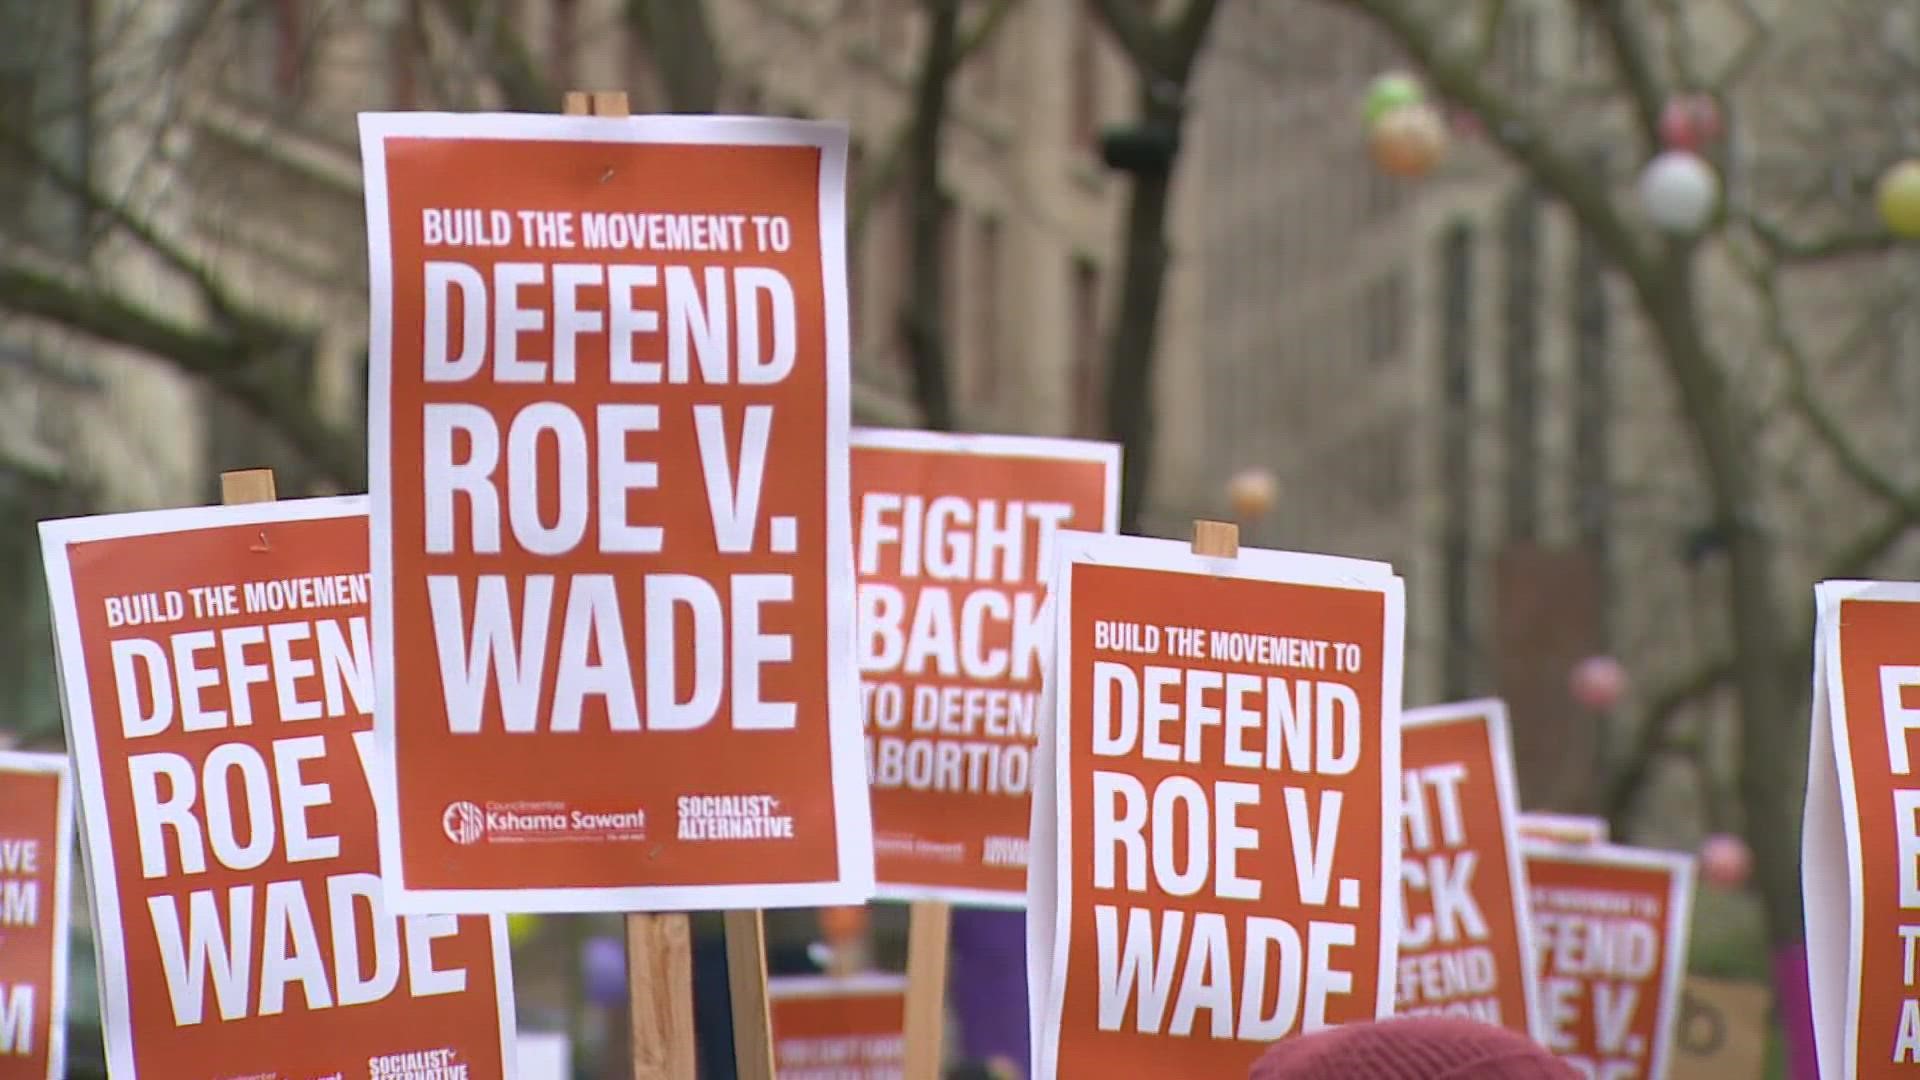 Lawmakers and voters are weighing in on how the fight over abortion rights could be a turning point in upcoming mid-term elections.